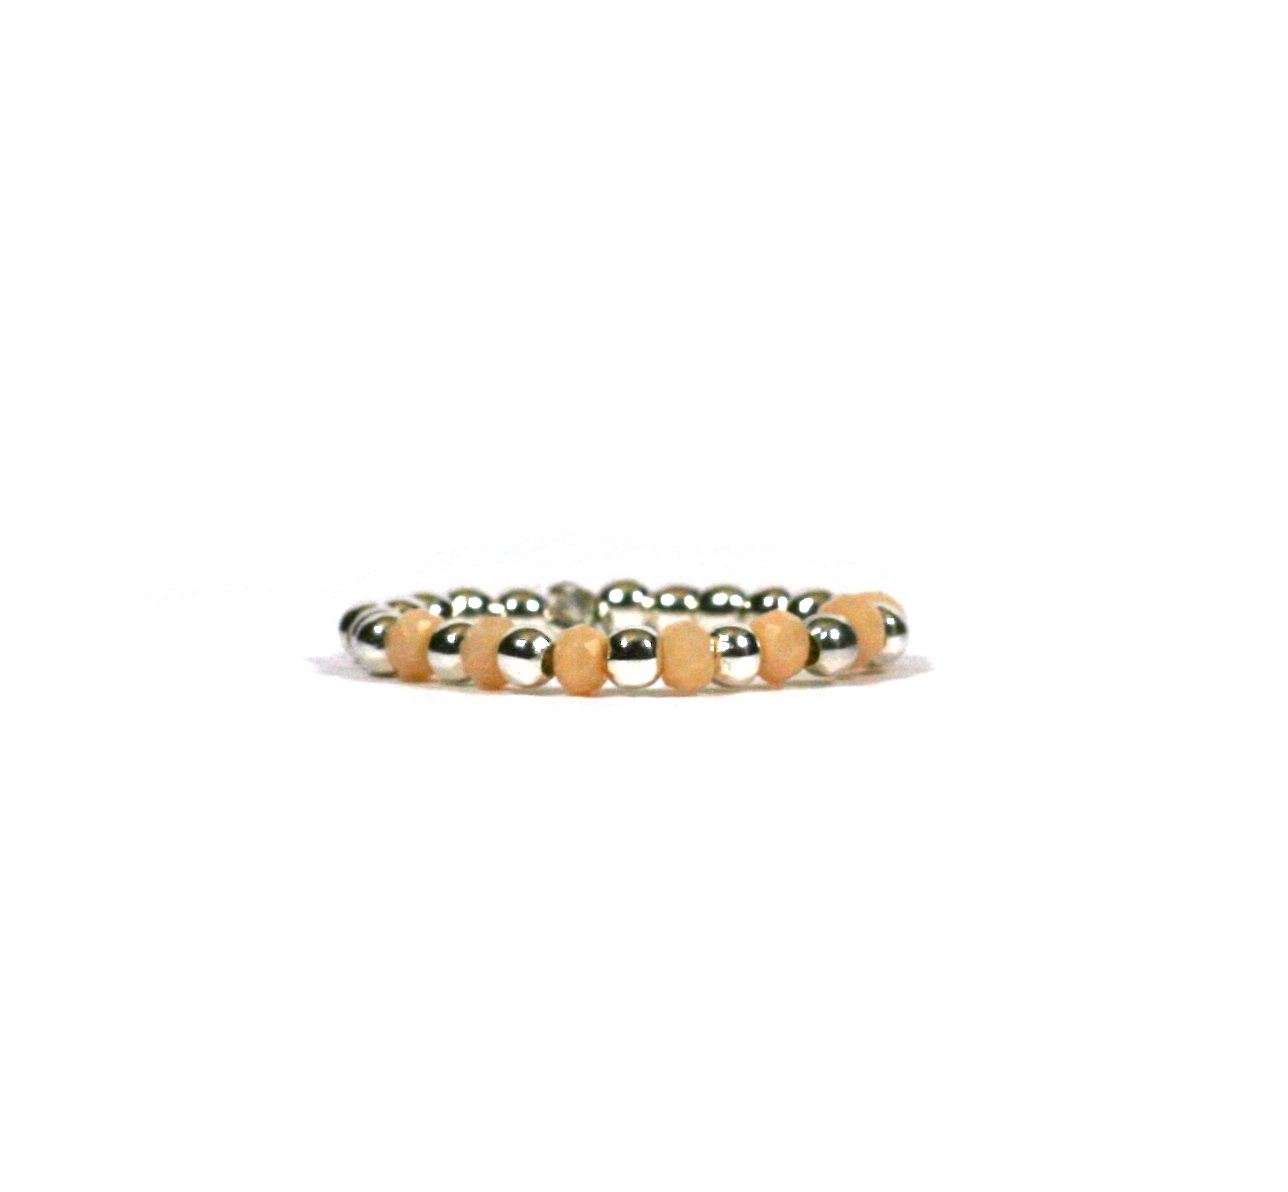 Chique - ring 925 sterling zilver - peach stenen - one size fits all